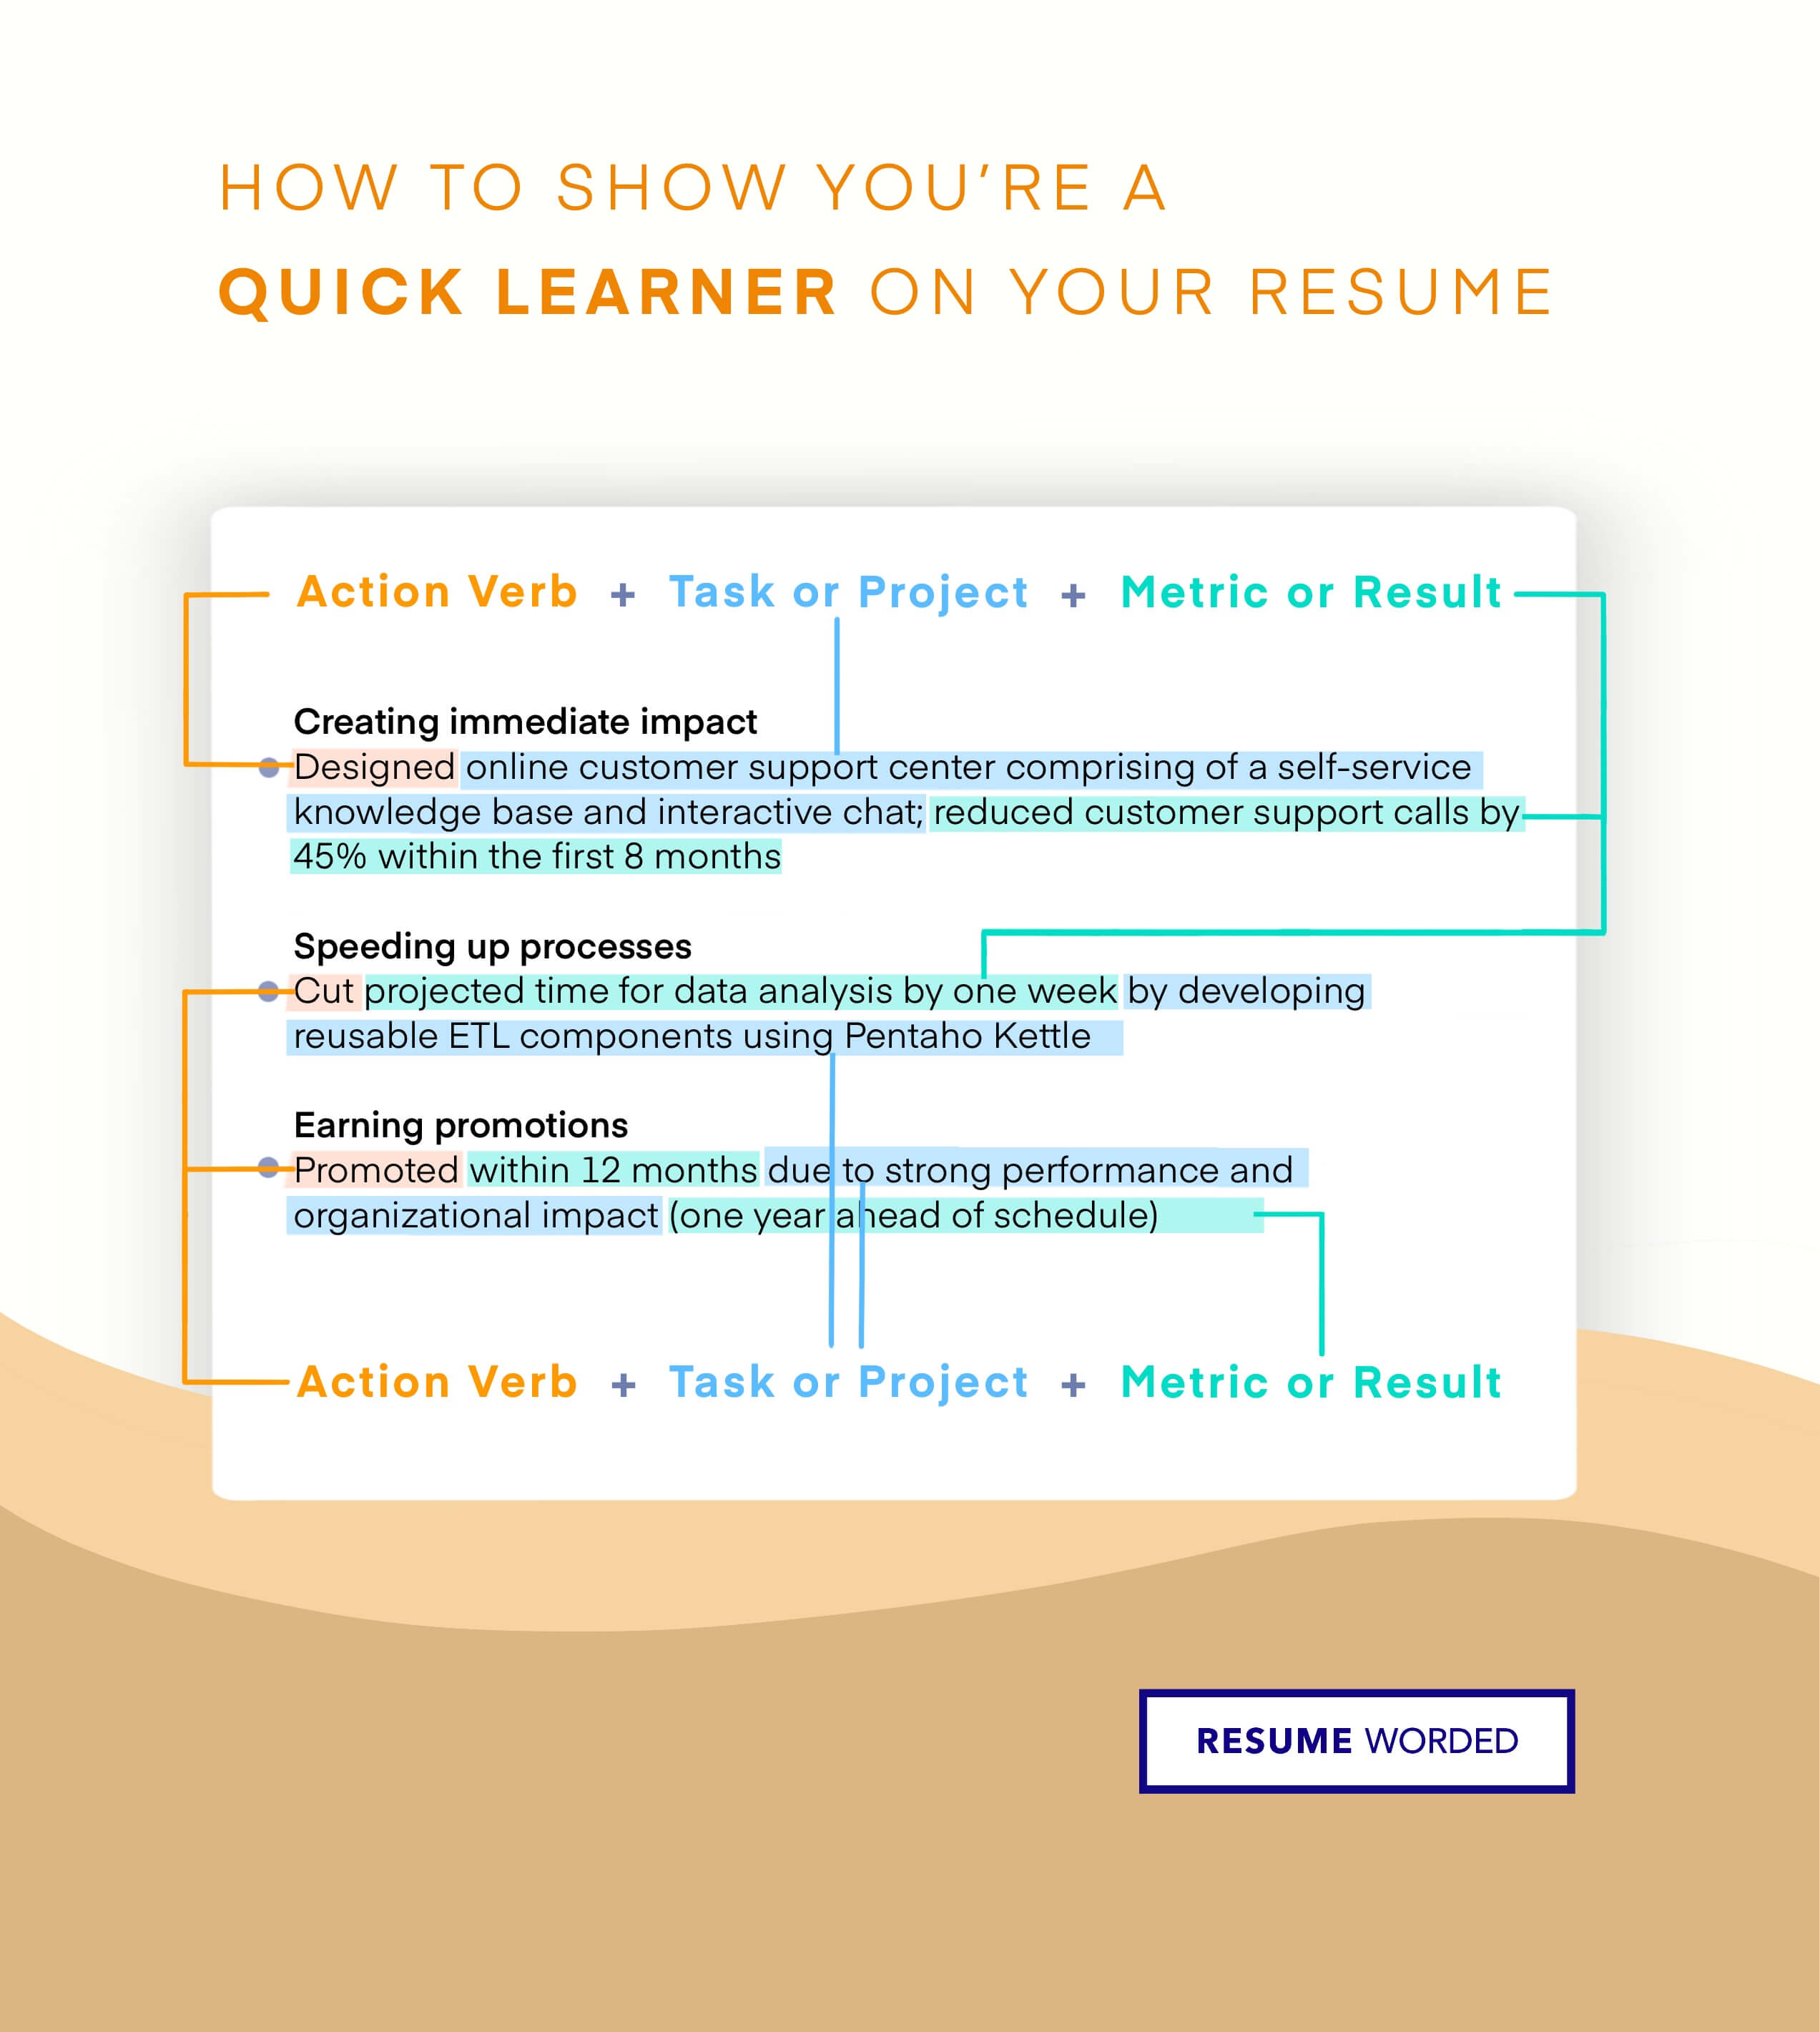 How To Say You re A Quick Learner On Your Resume